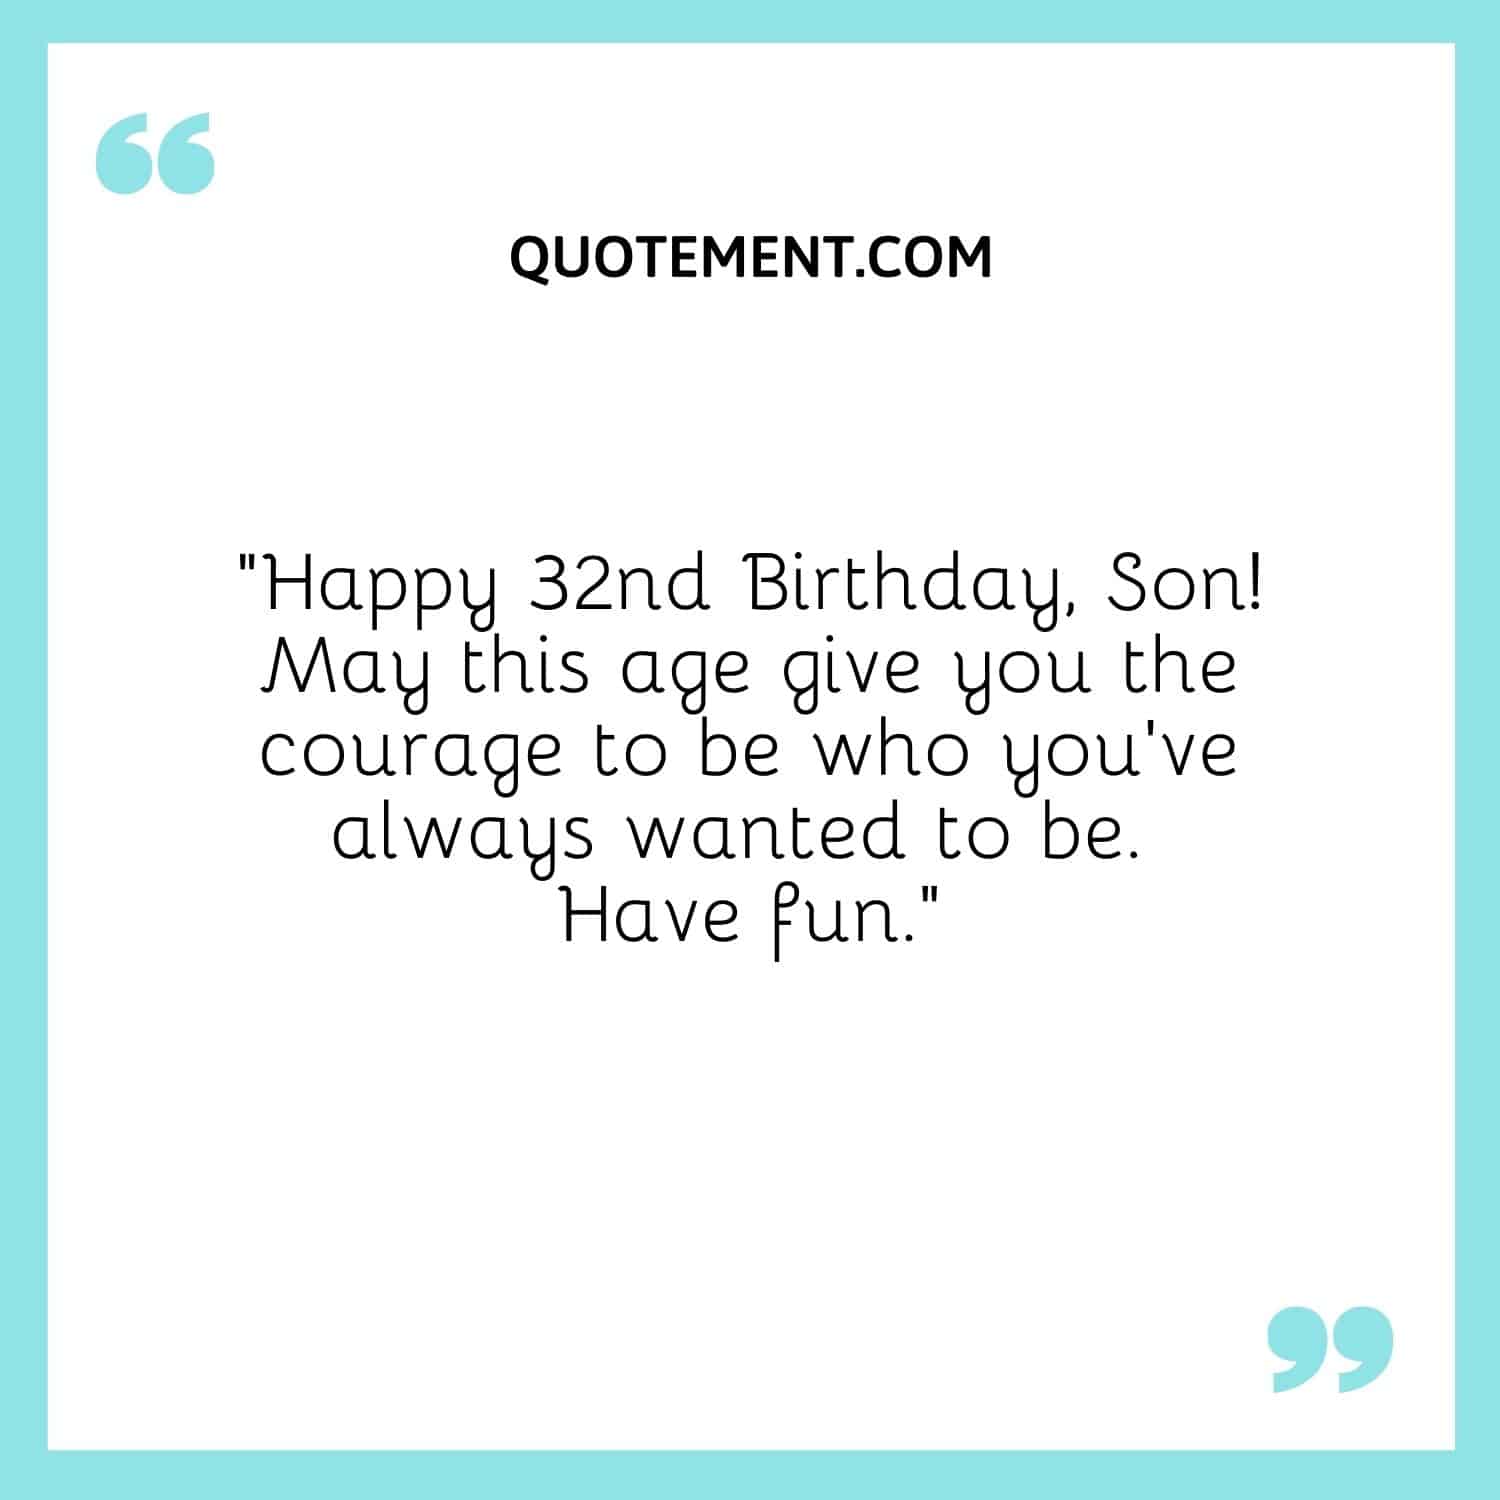 “Happy 32nd Birthday, Son! May this age give you the courage to be who you’ve always wanted to be. Have fun.”